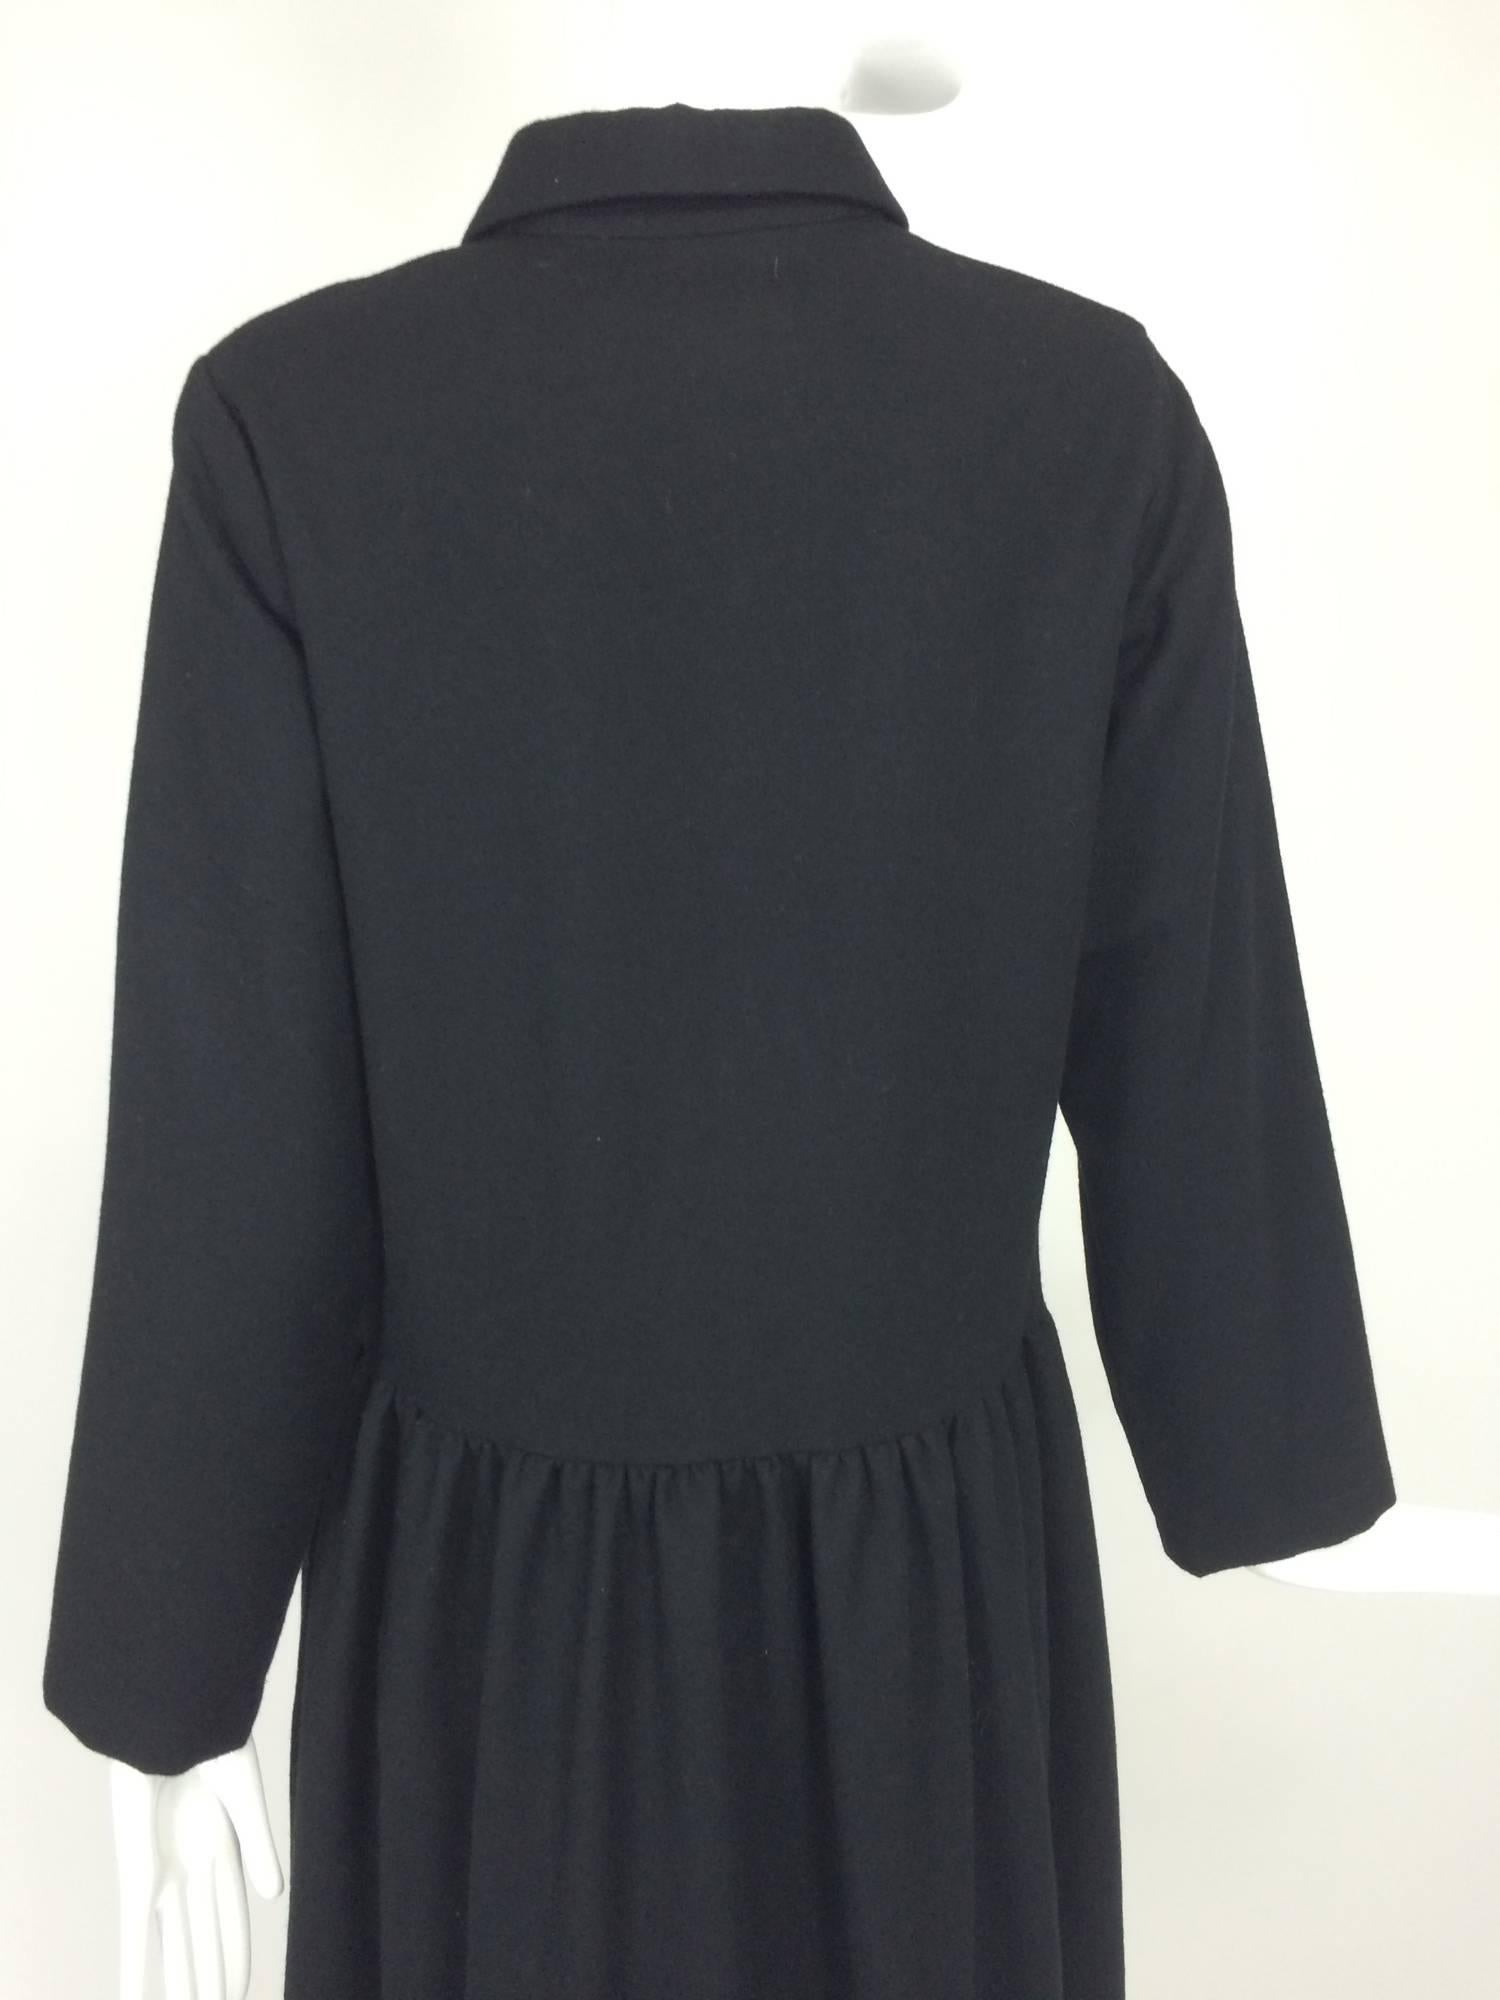 Women's or Men's Tricot Comme des Garcons black LS wool dress with gathered skirt 